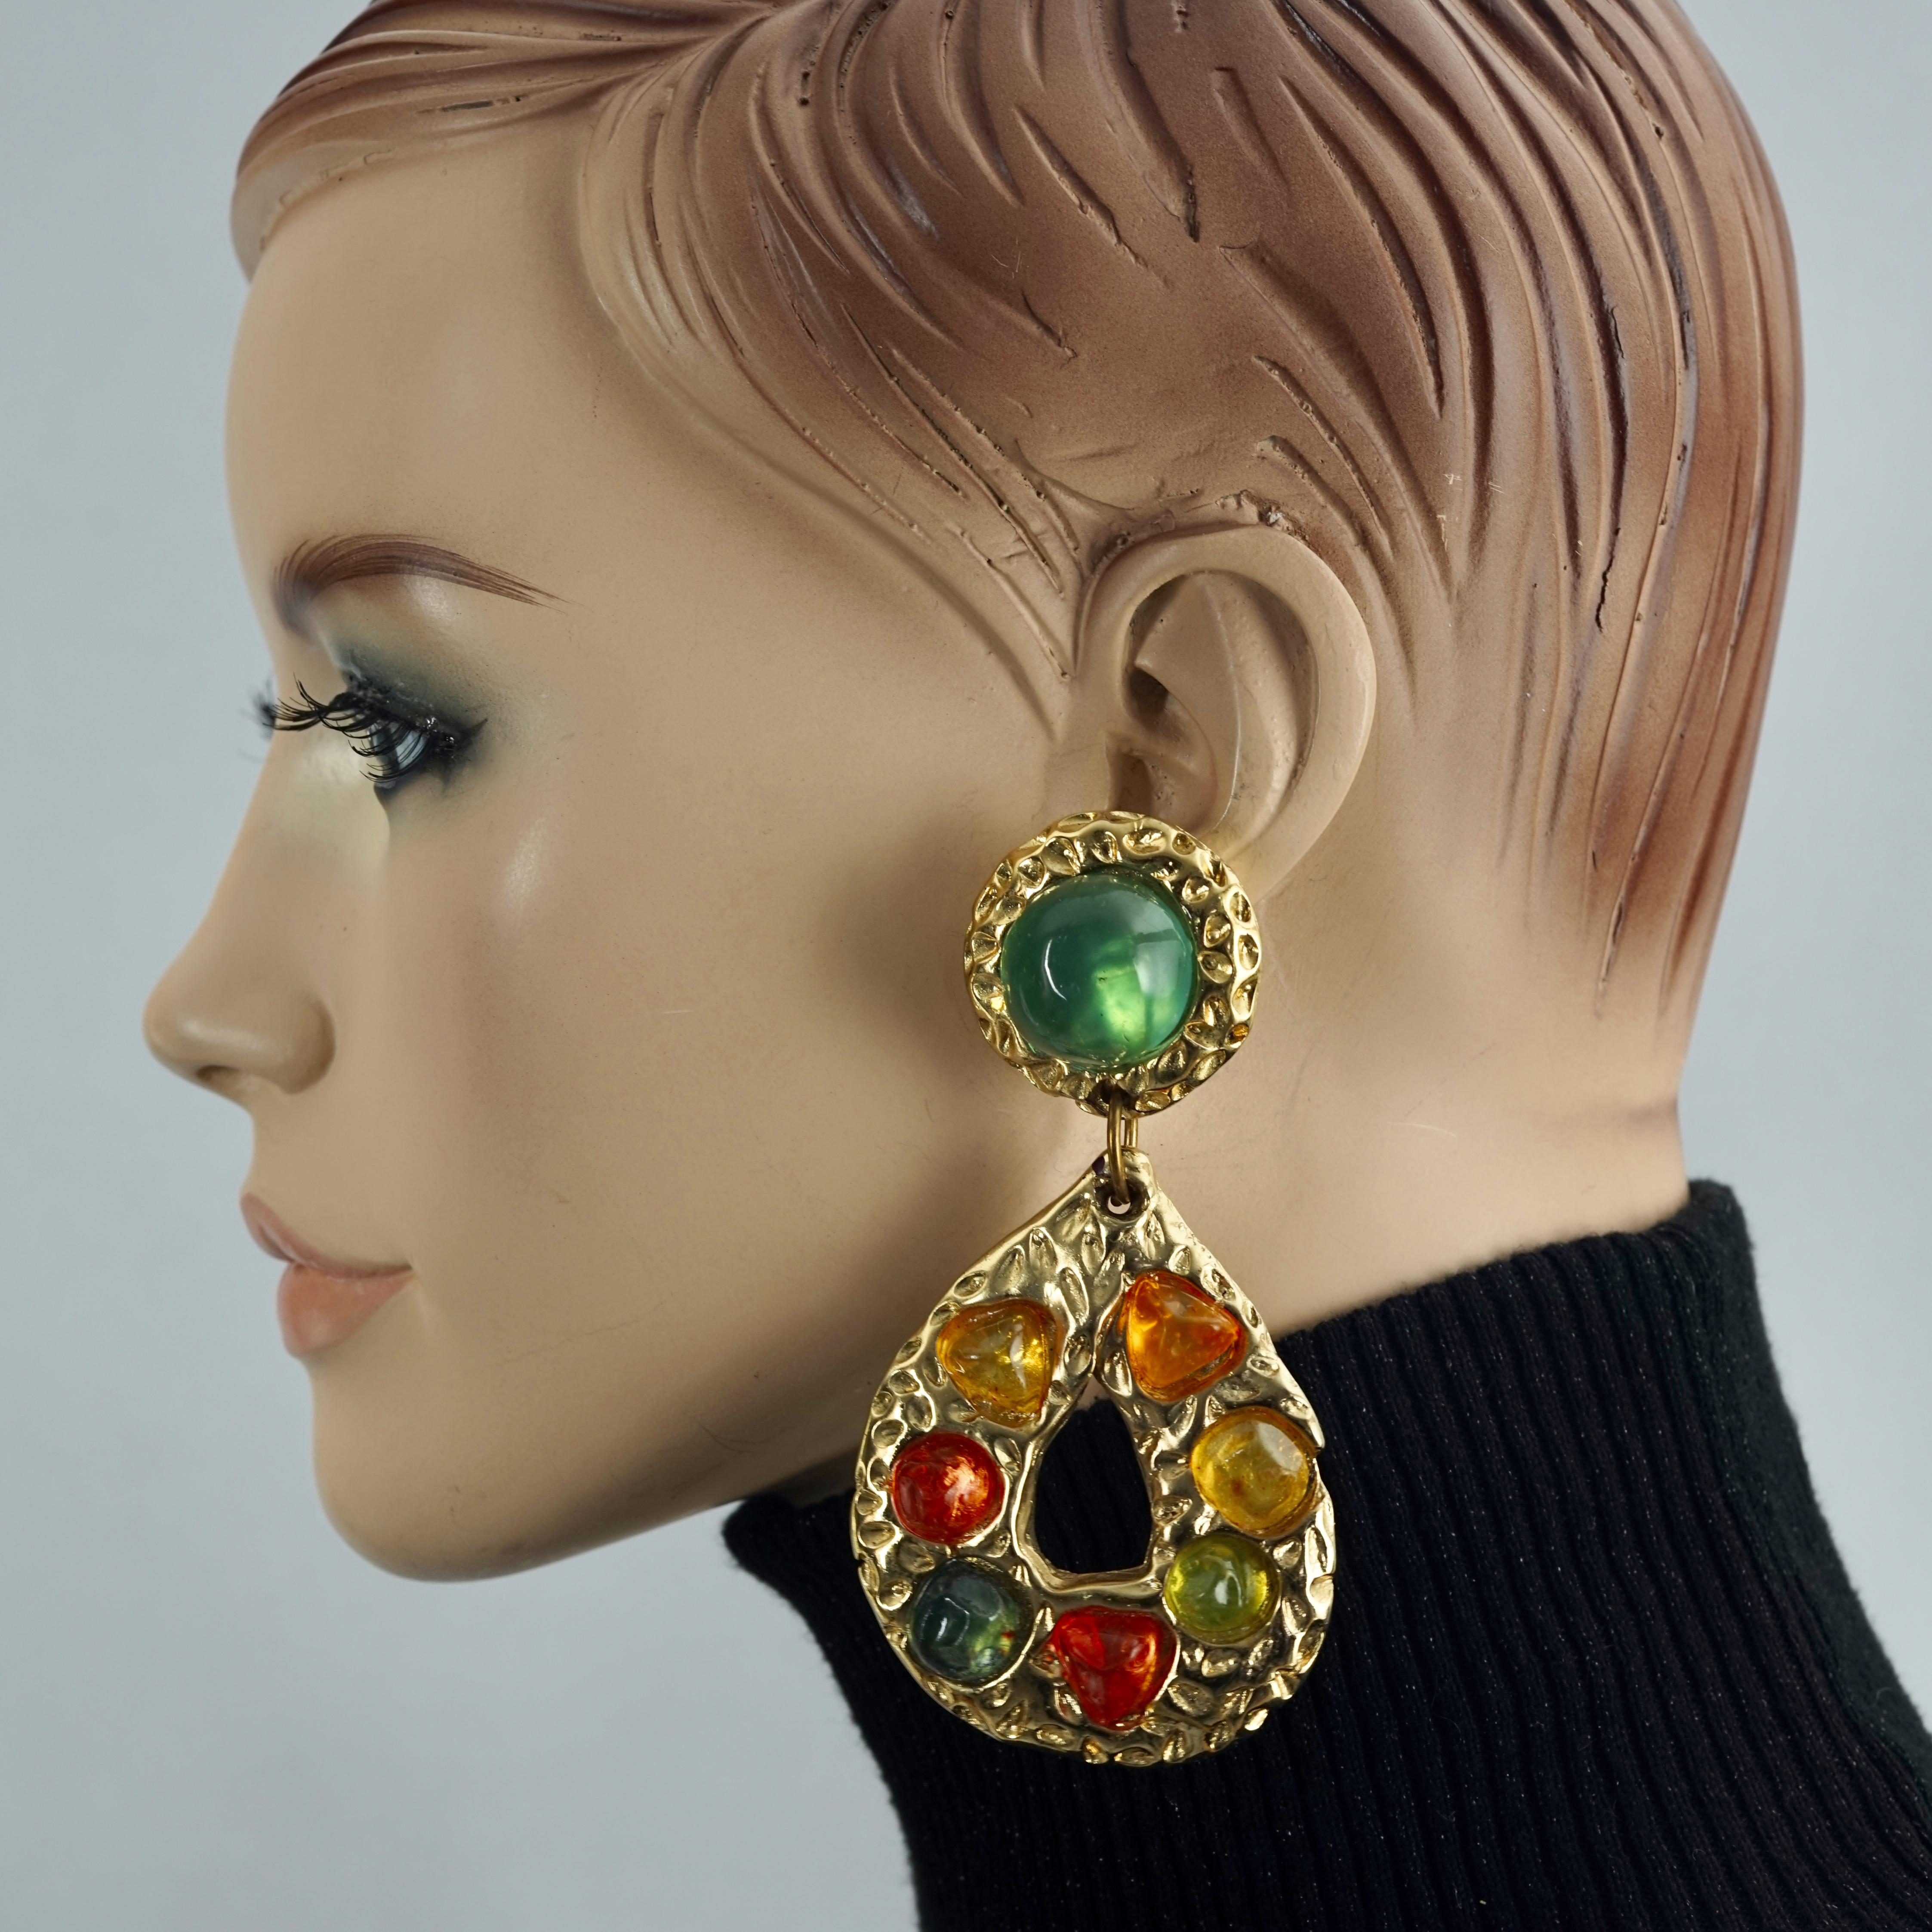 Vintage JACKY DE G Baroque Multicolor Cabochon Massive Earrings

Measurements:
Height: 3.93 inches (10 cm)
Width: 2.04 inches (5.2 cm)
Weight per Earring: 30 grams

Features:
- 100% Authentic JACKY DE G.
- Baroque style earrings.
- Massive